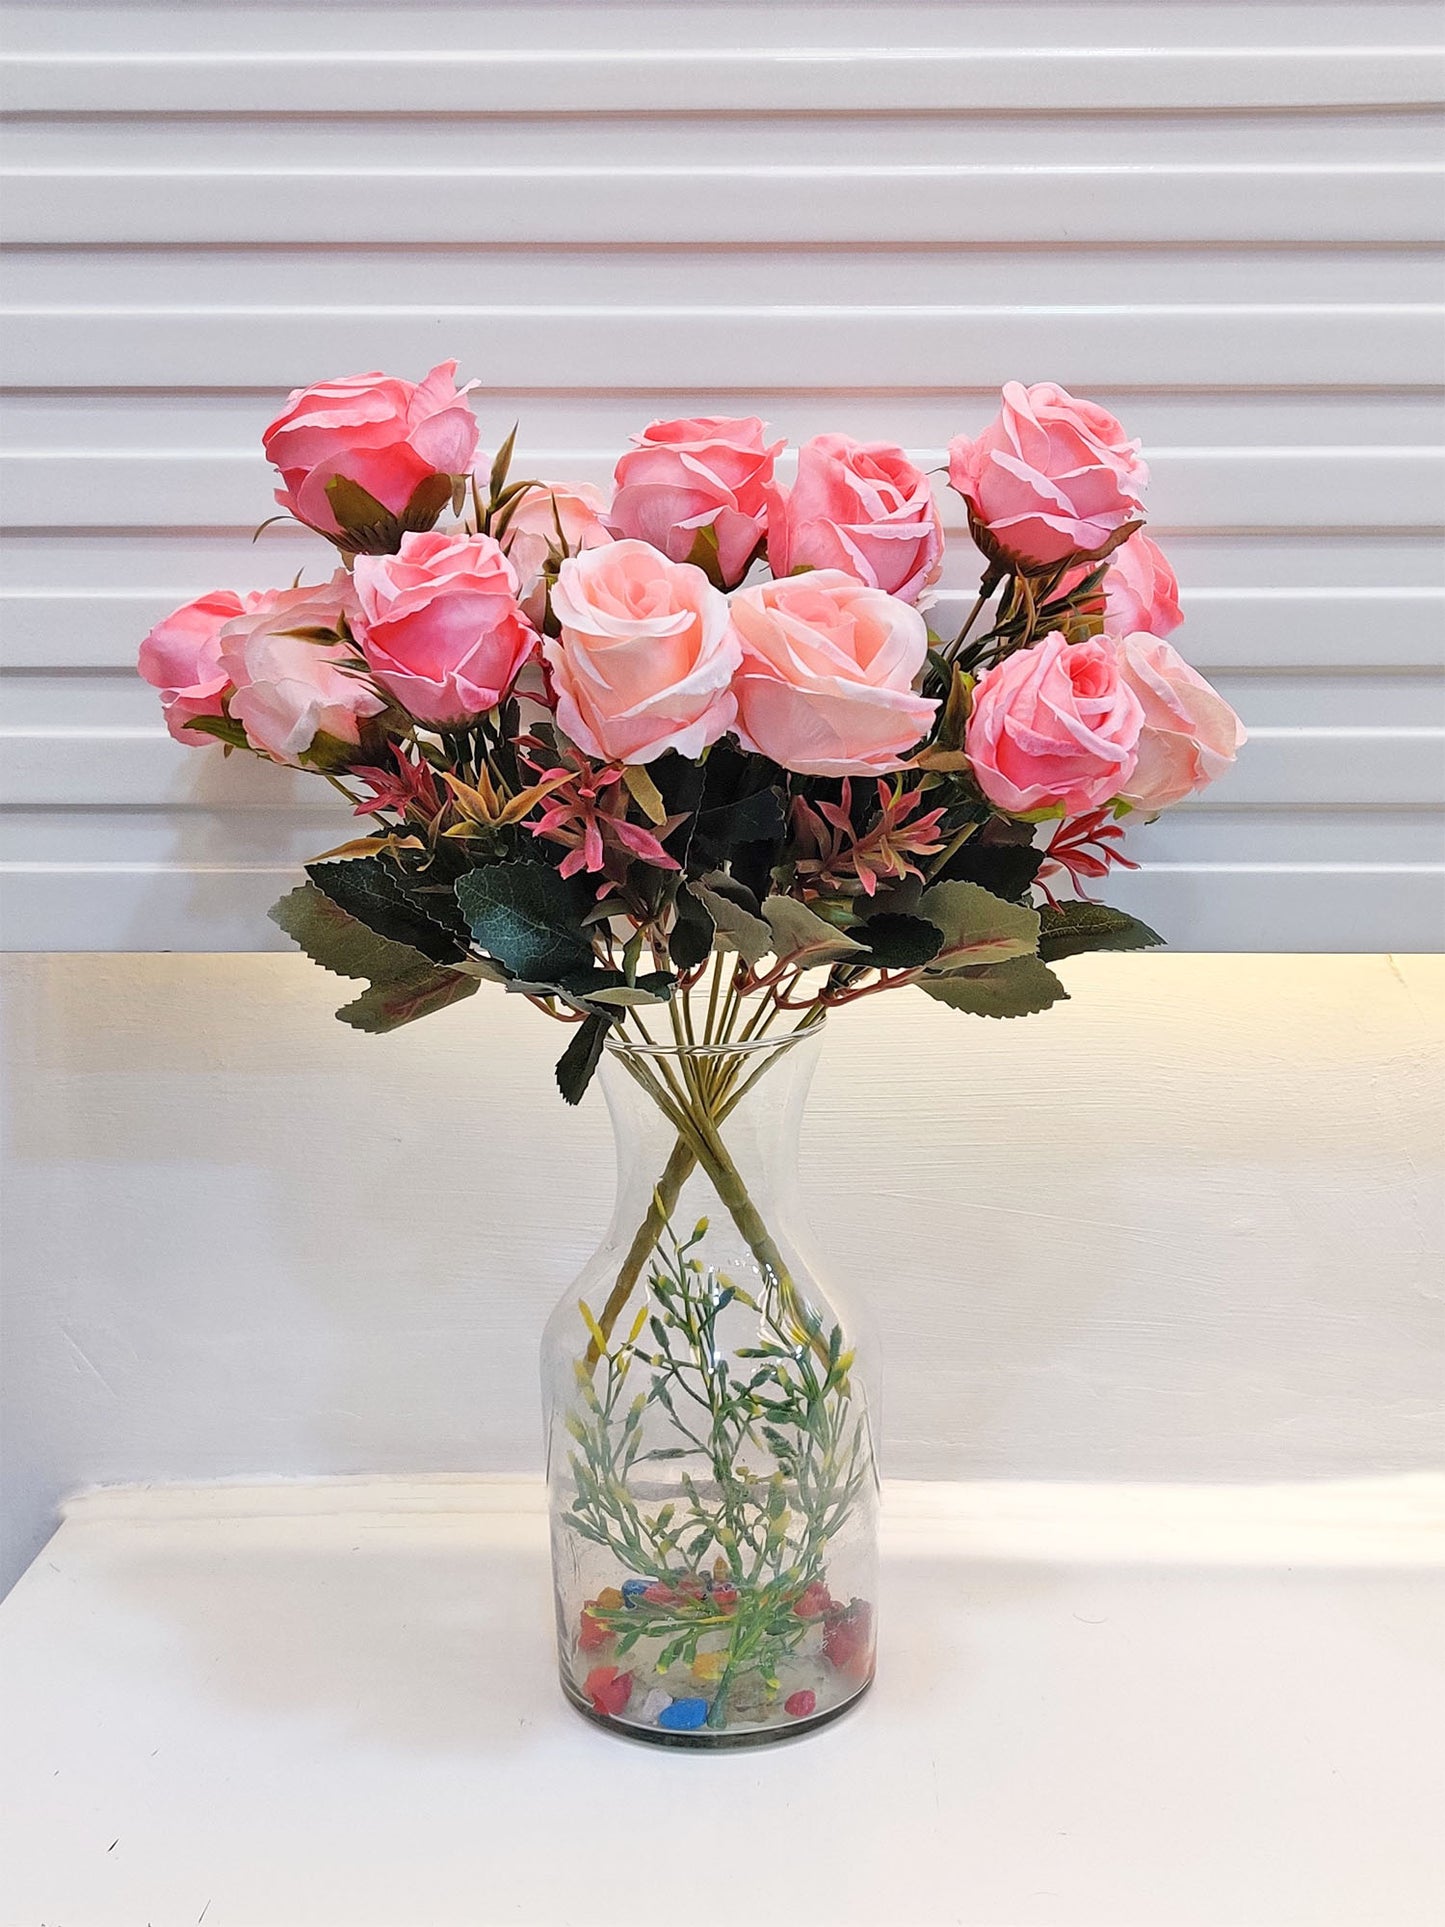 Pretty in Pink: Lifelike Artificial Pink Rose - Timeless Charm for Any Occasion, Vase filler, Home Decoration, DIY Craft, Gifting, Combo Pack of 2 Pieces, Without Vase